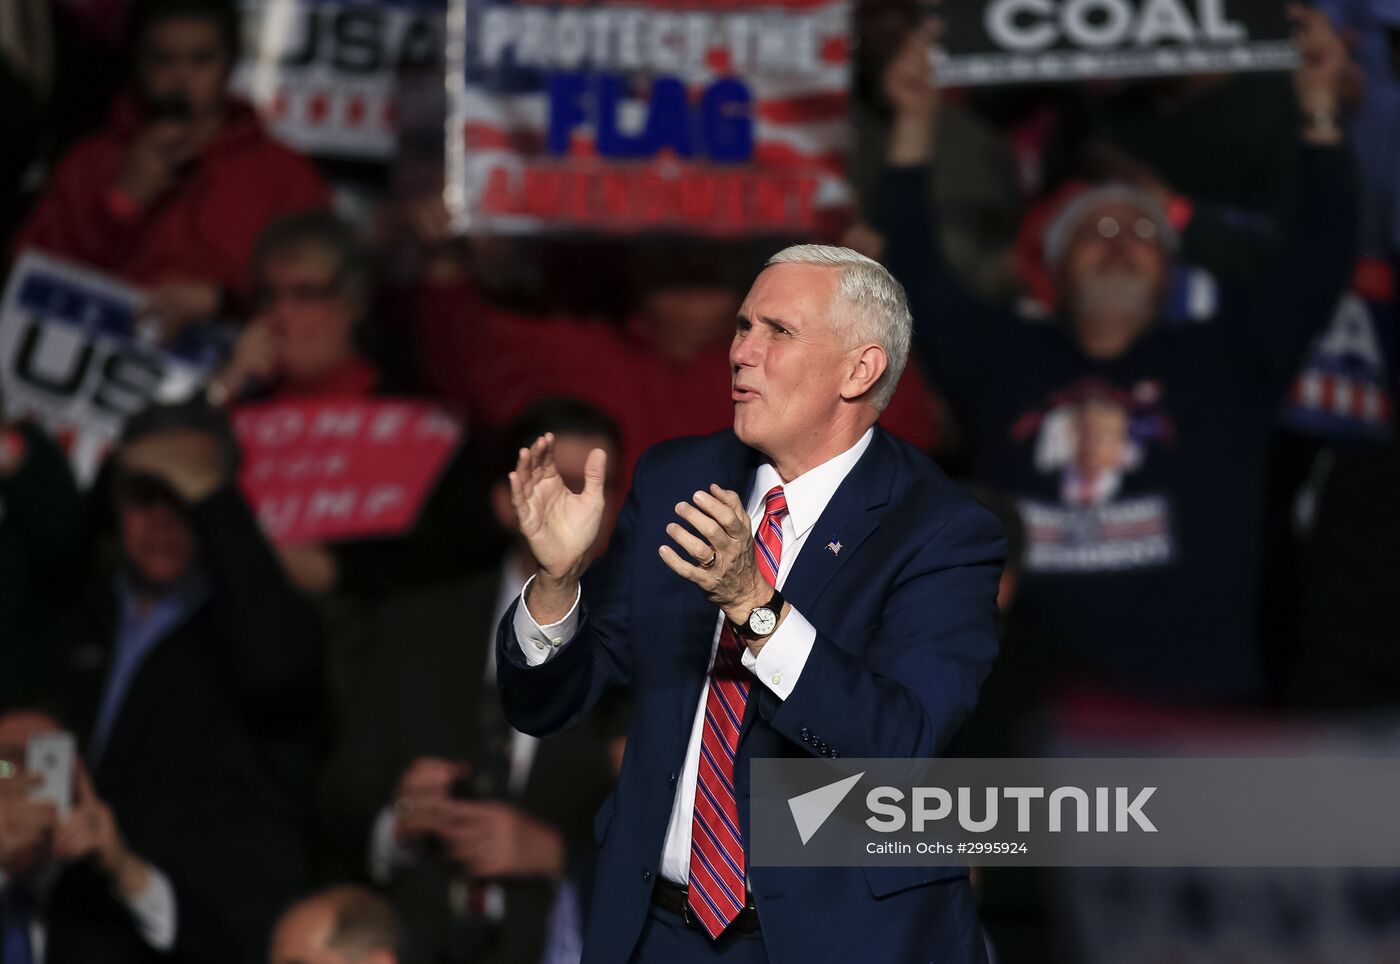 Donald Trump and Mike Pence meet with voters in Pennsylvania